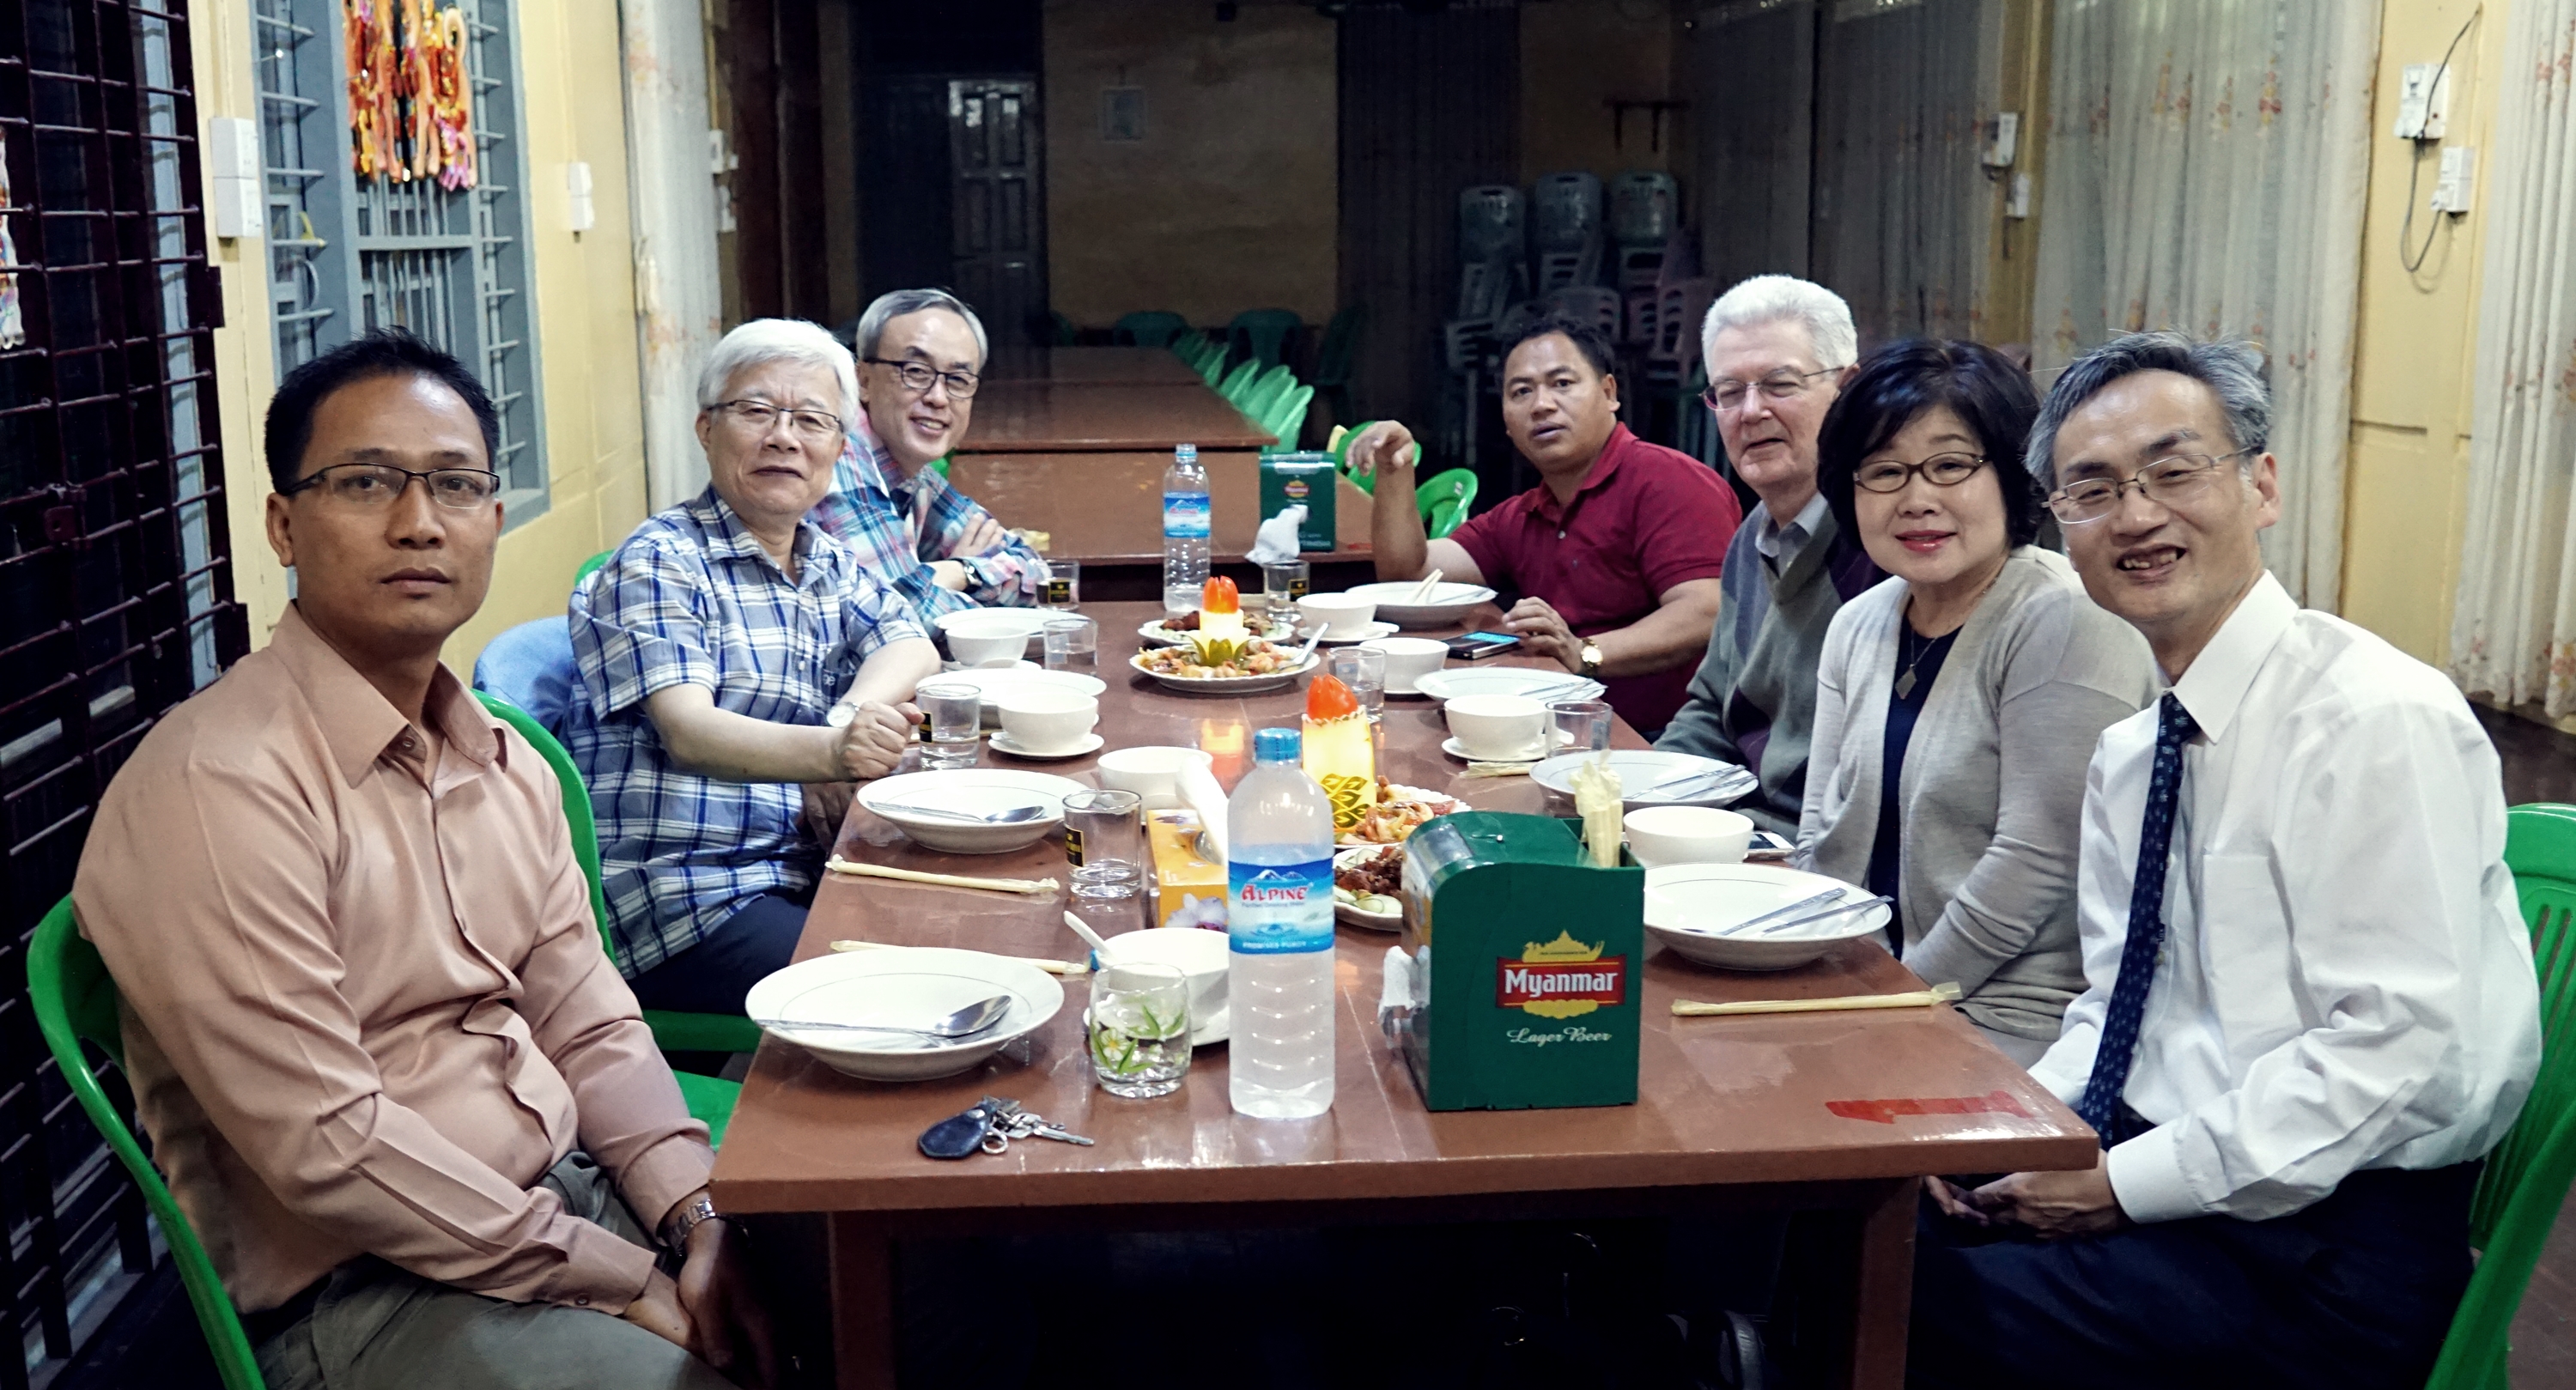 Dinner with the team and Presbyterian Church of Myanmar friends.